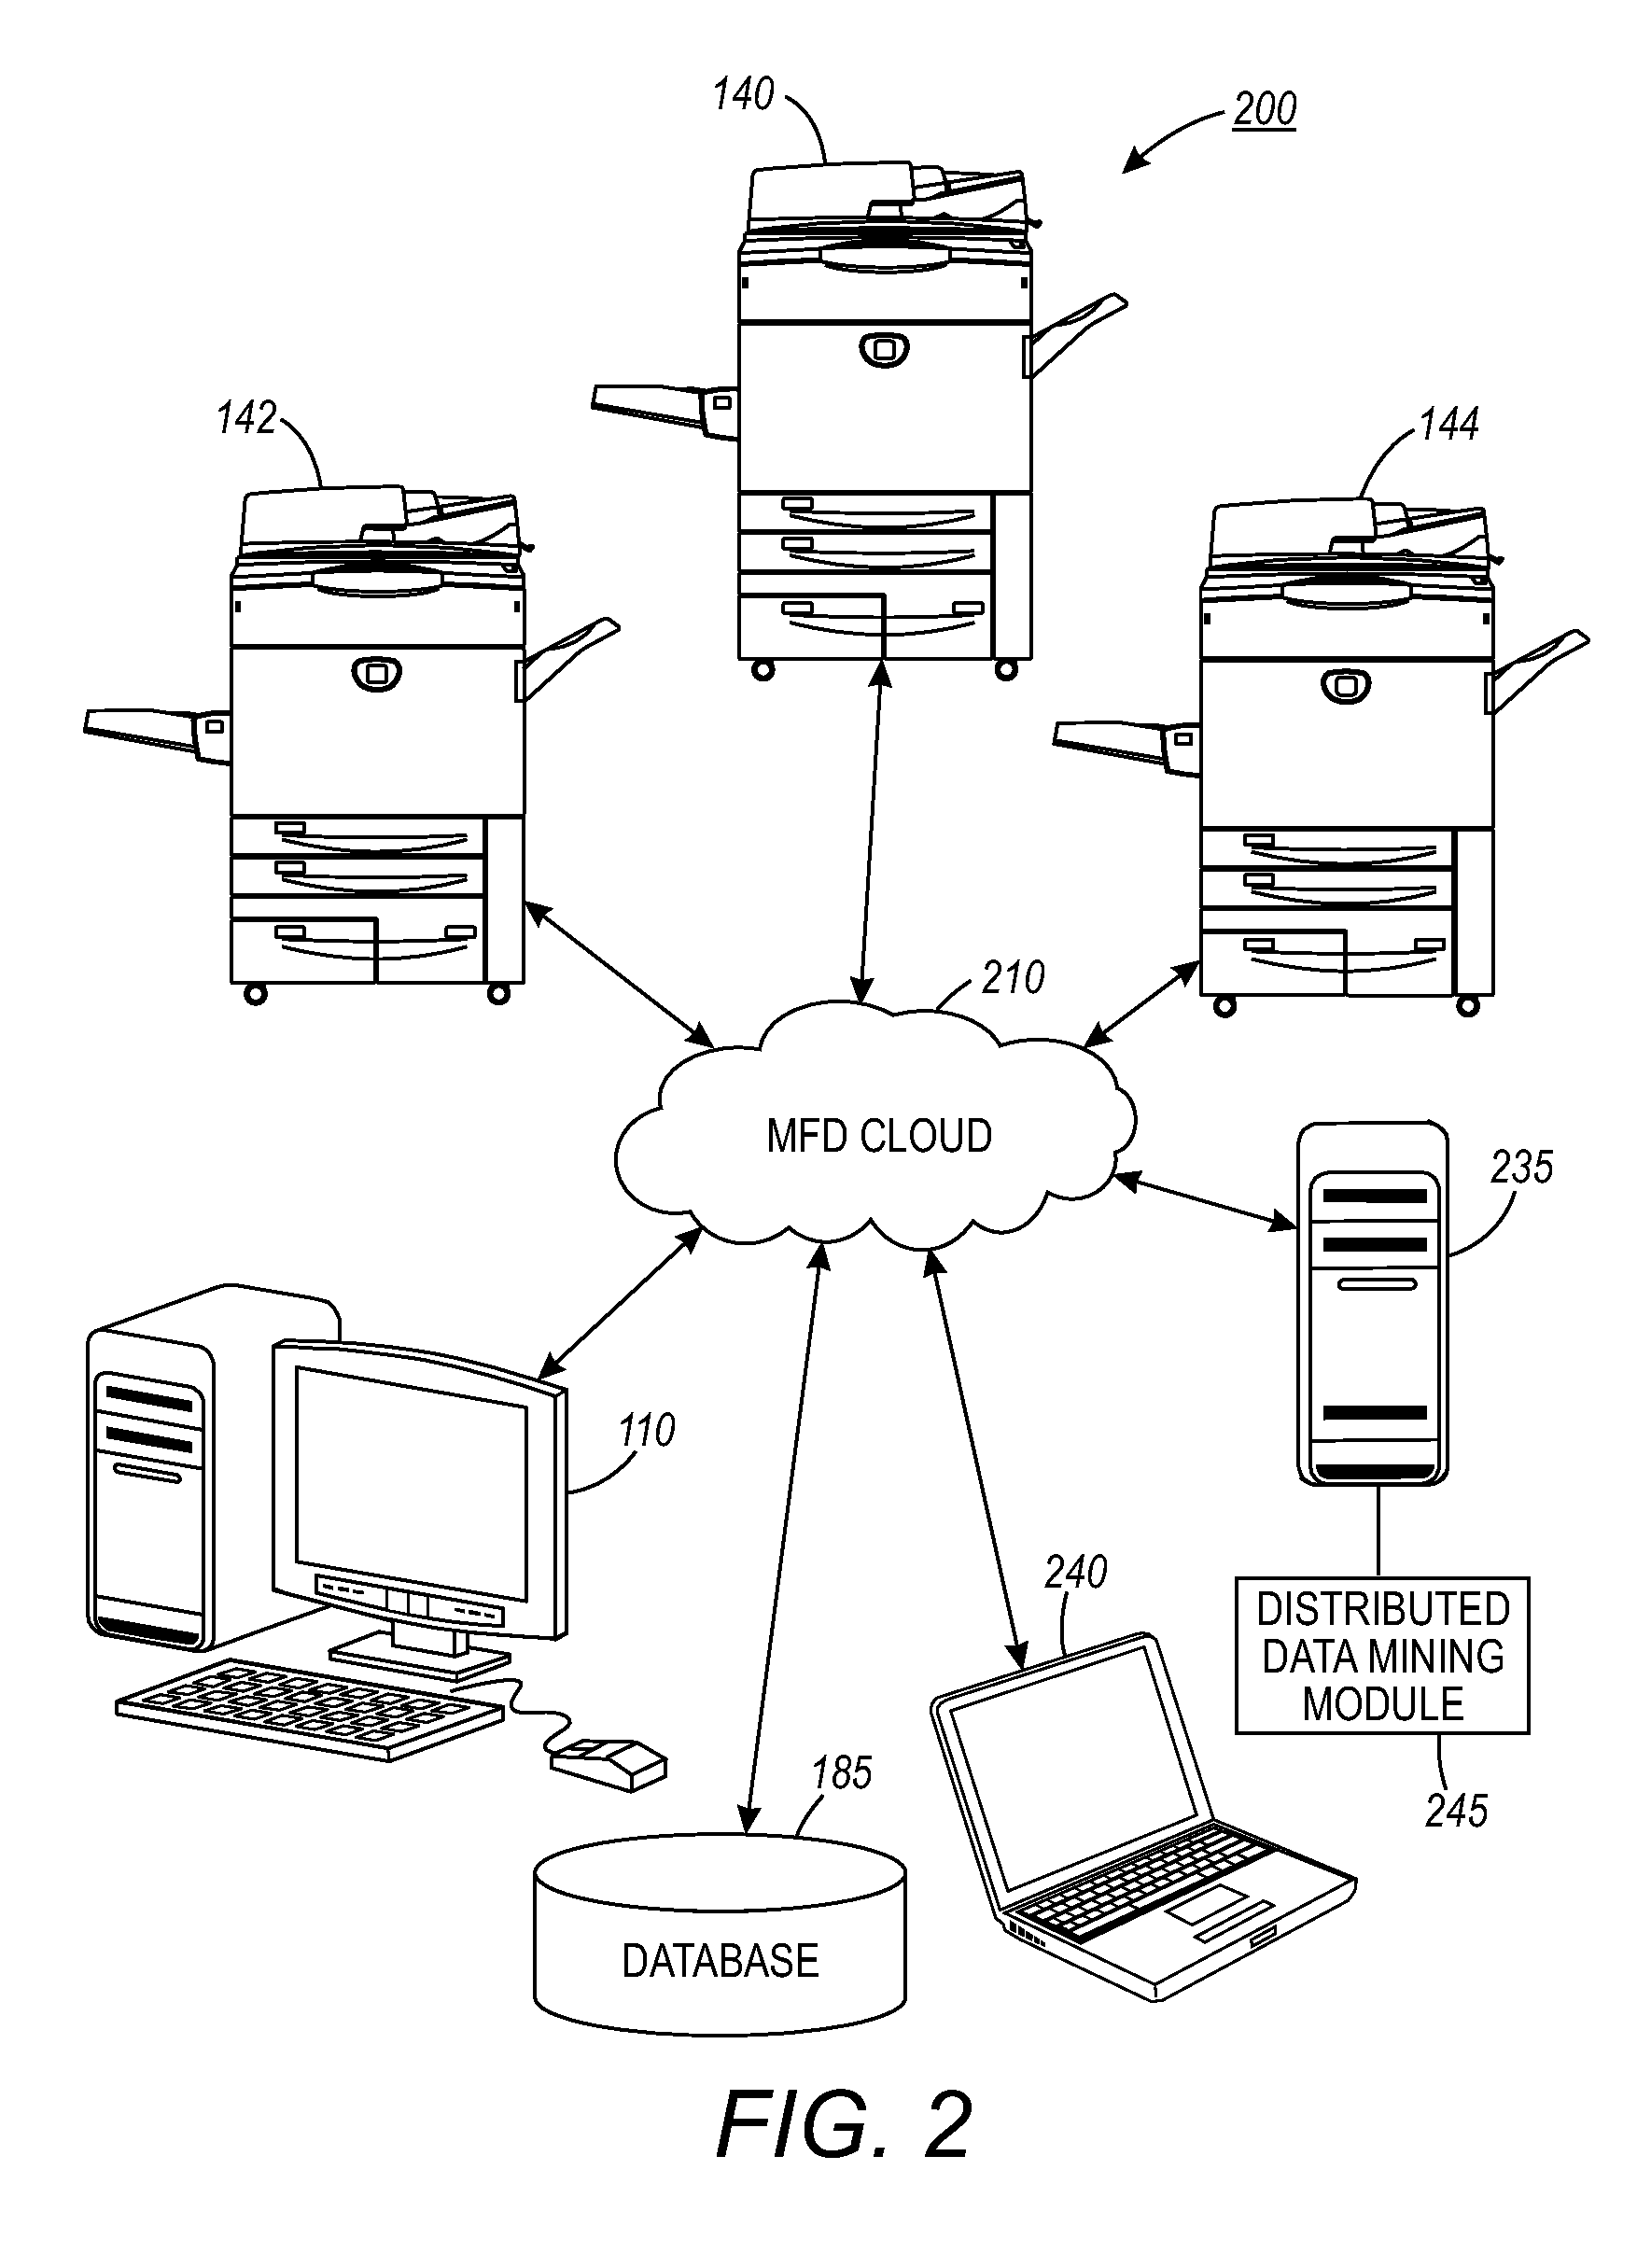 Method and system for determining root cause of problems in members of a fleet of multi-function devices